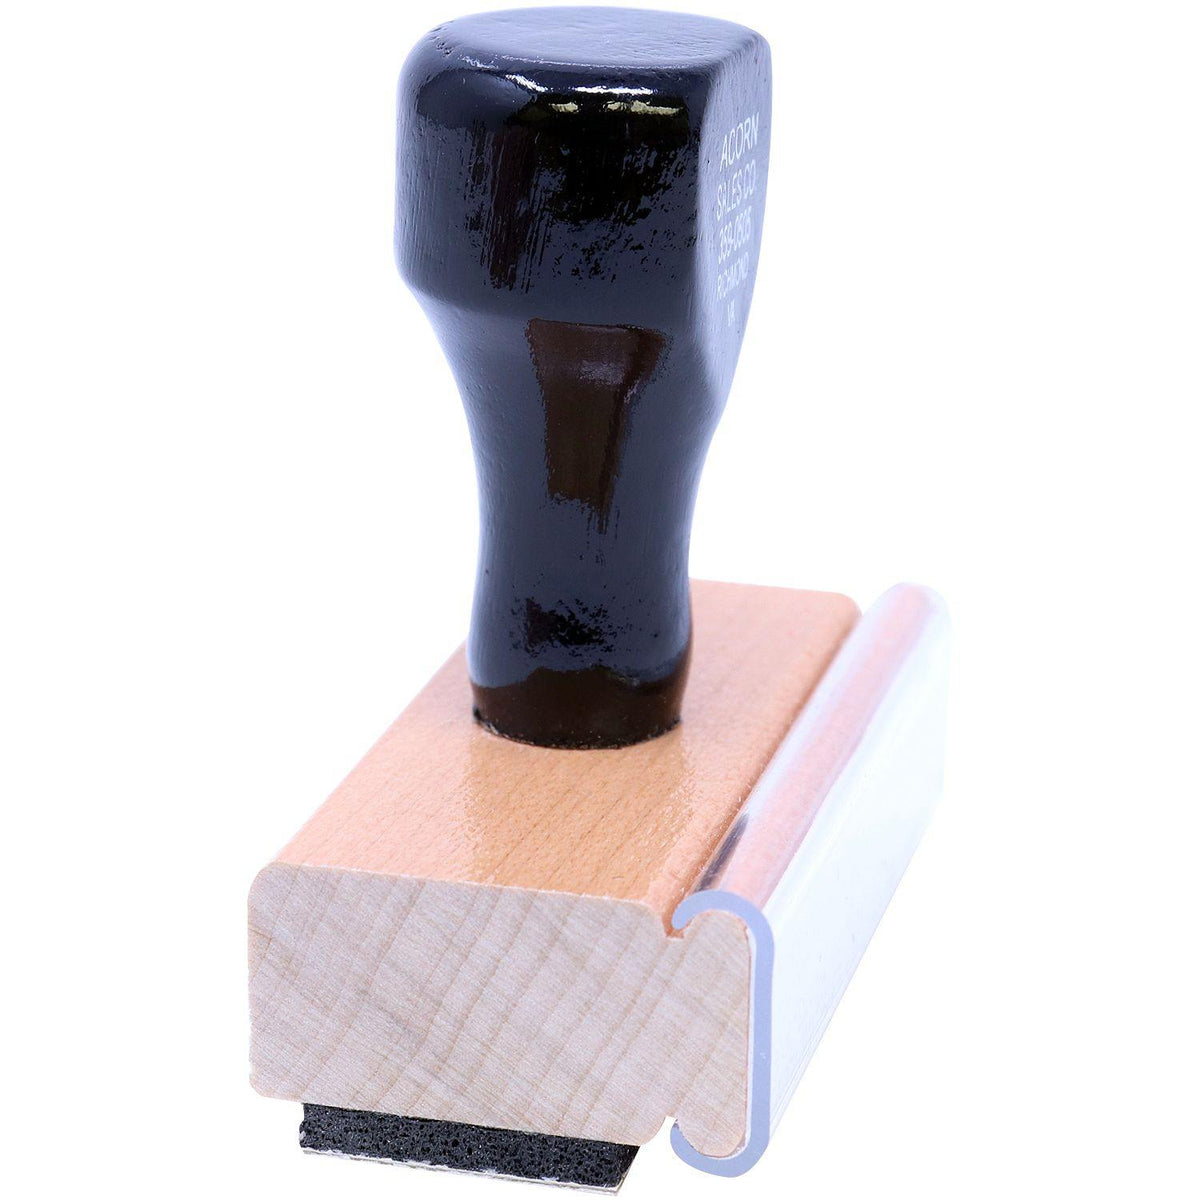 Side View of Attorney Client Privilege Rubber Stamp at an Angle